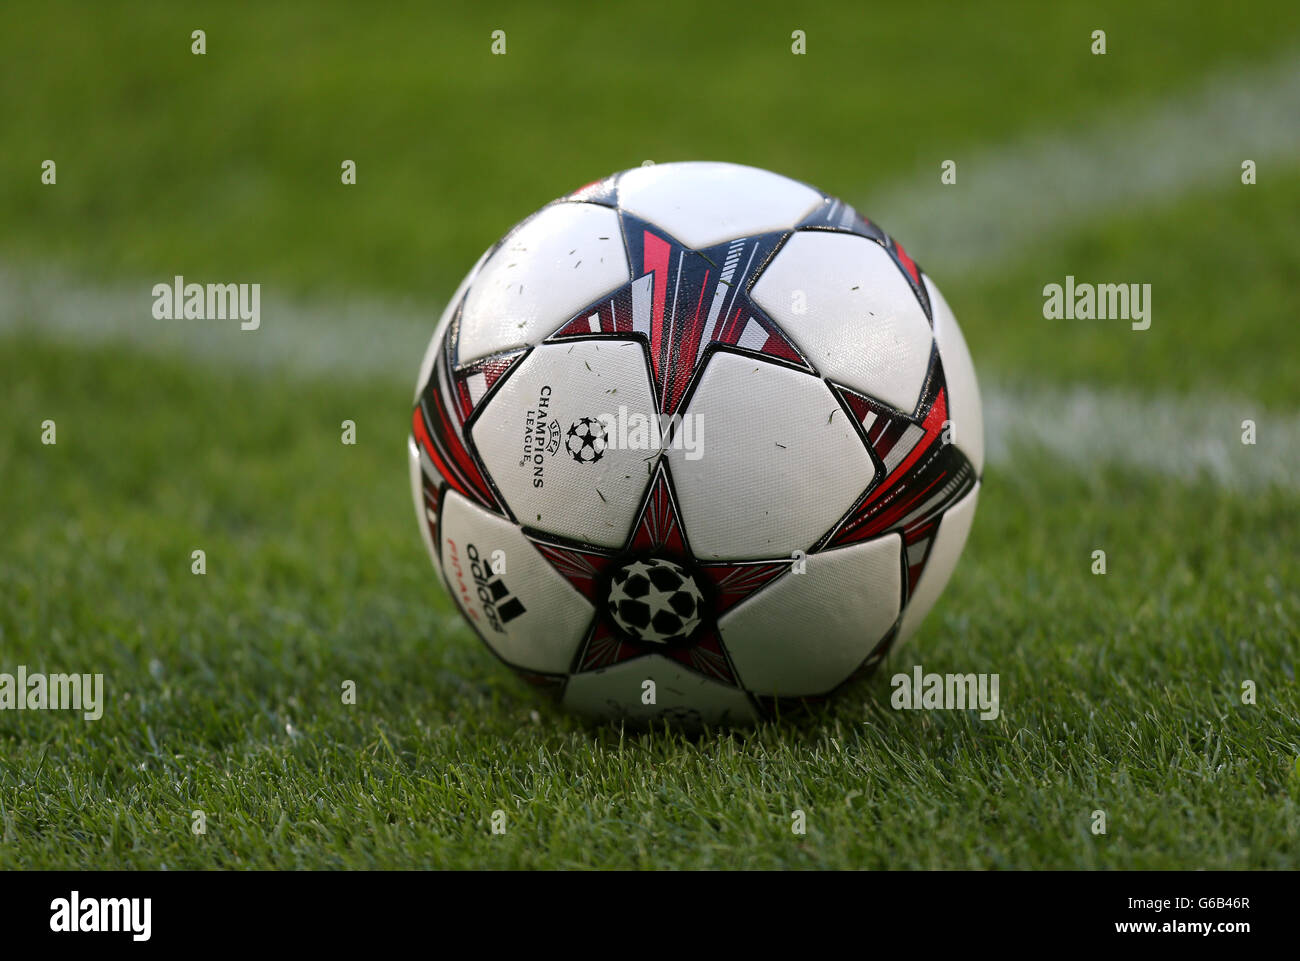 A view of an official Champions League Adidas match ball Stock Photo